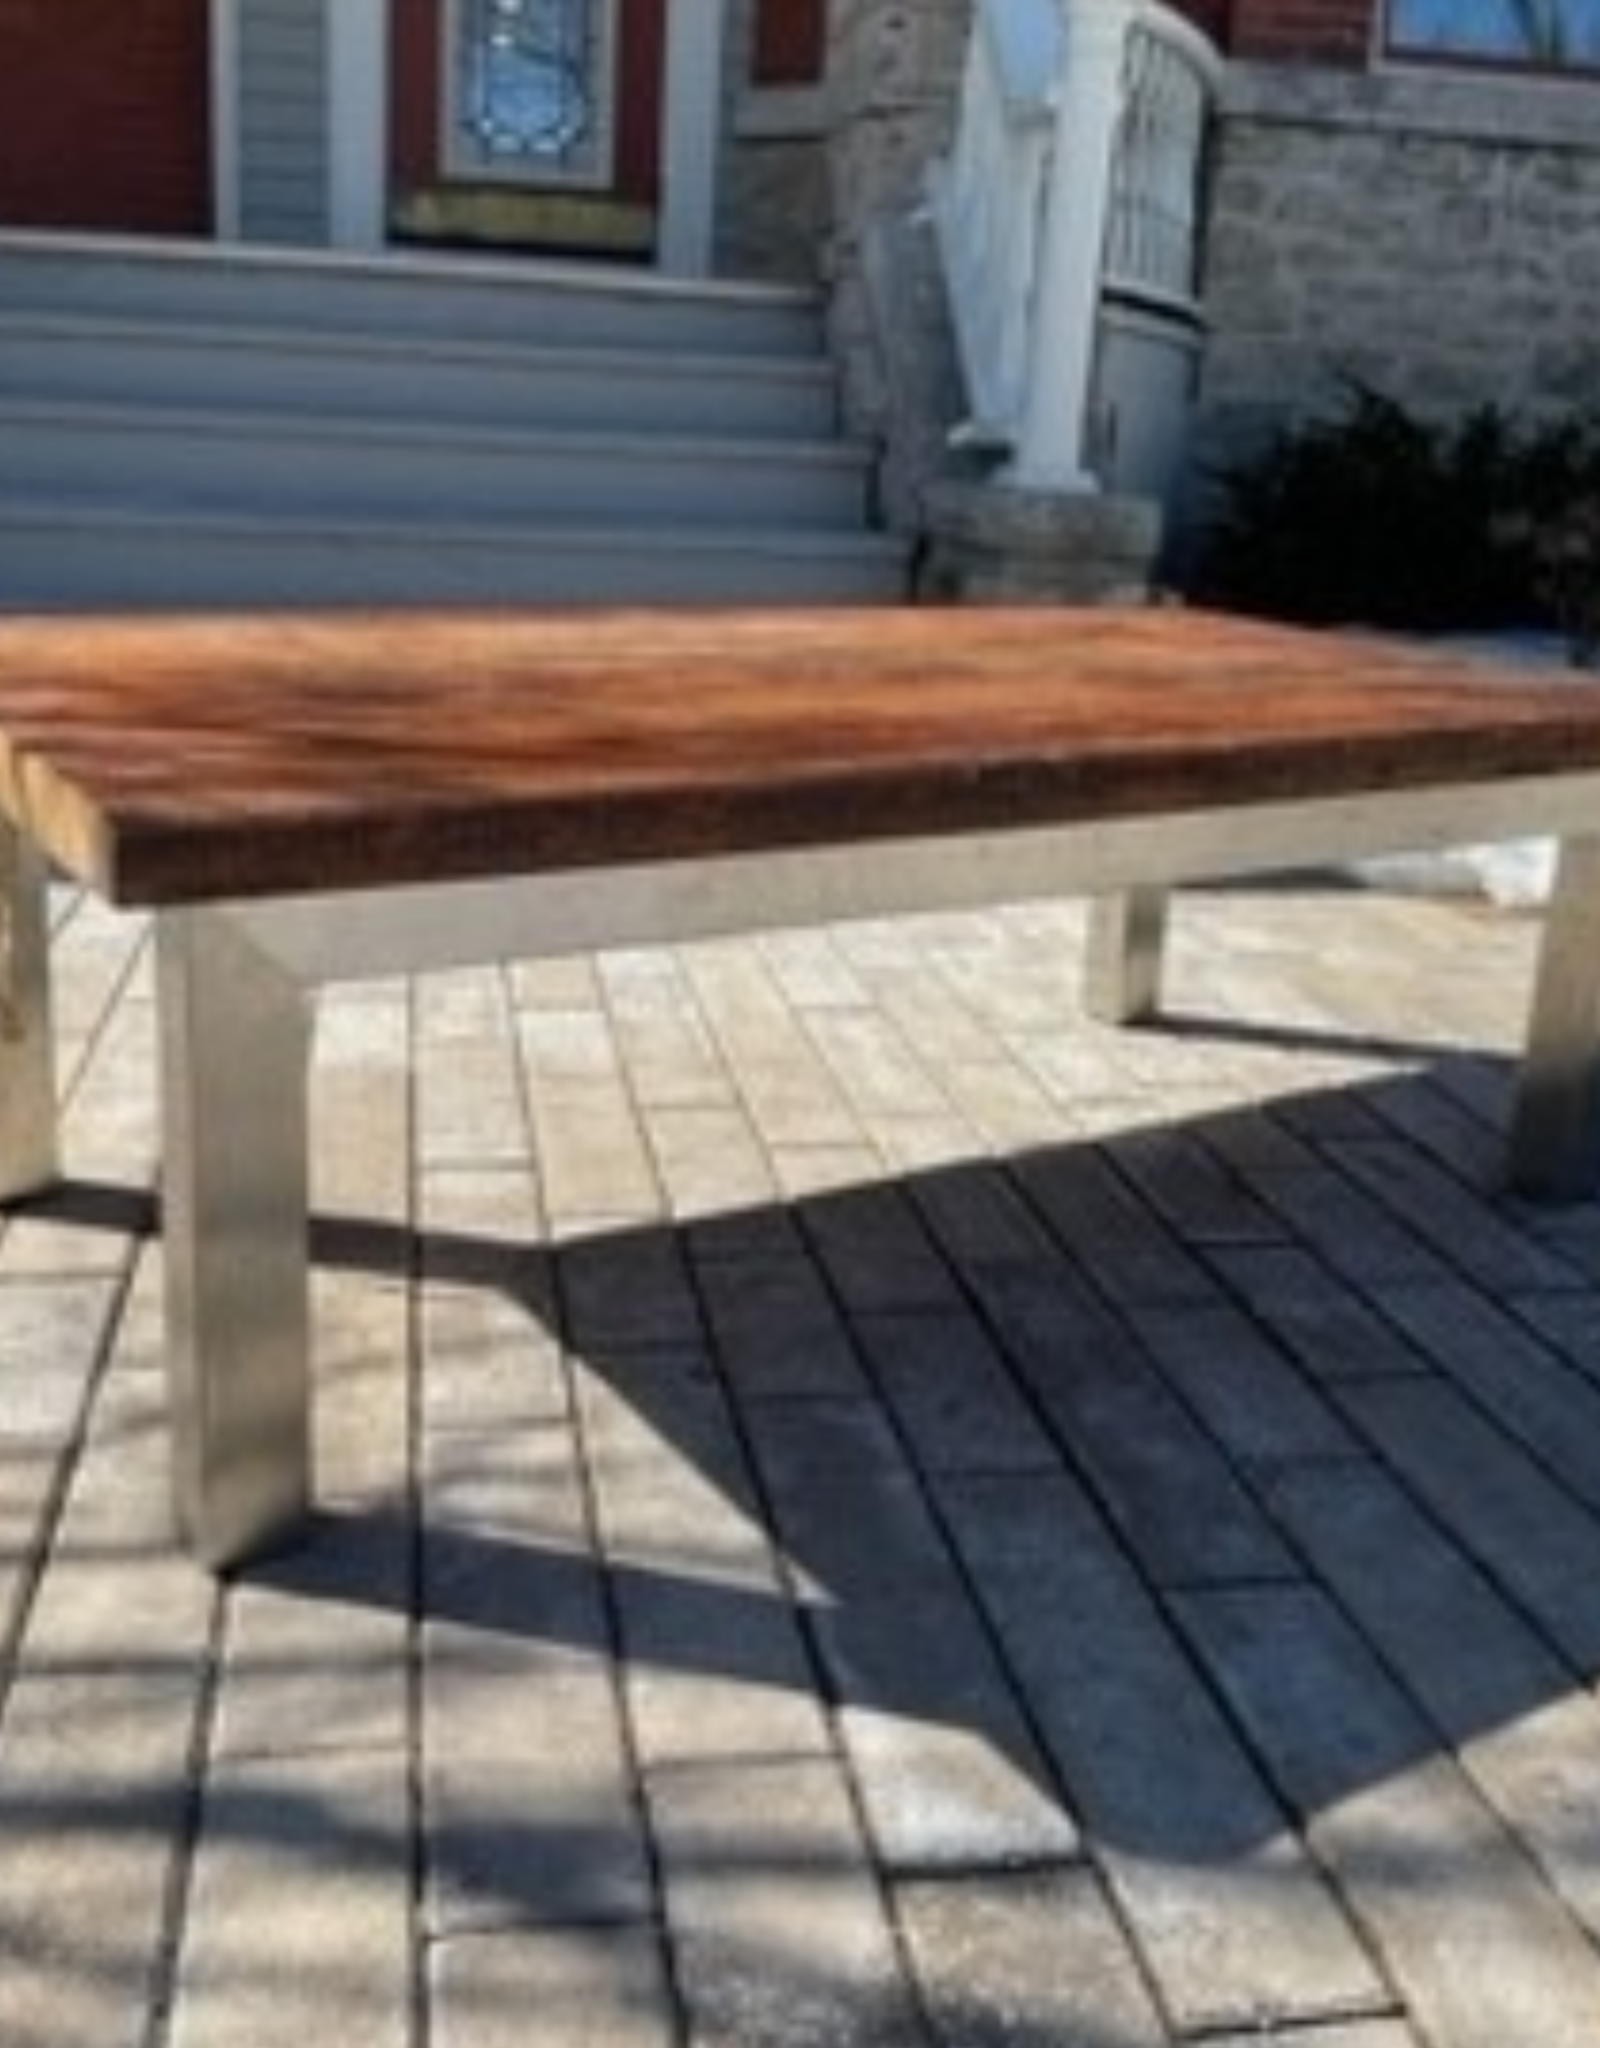 Coffee Table - Steel Legs with Wooden Top L47"  W24" H15" Reg $1100 Now $500